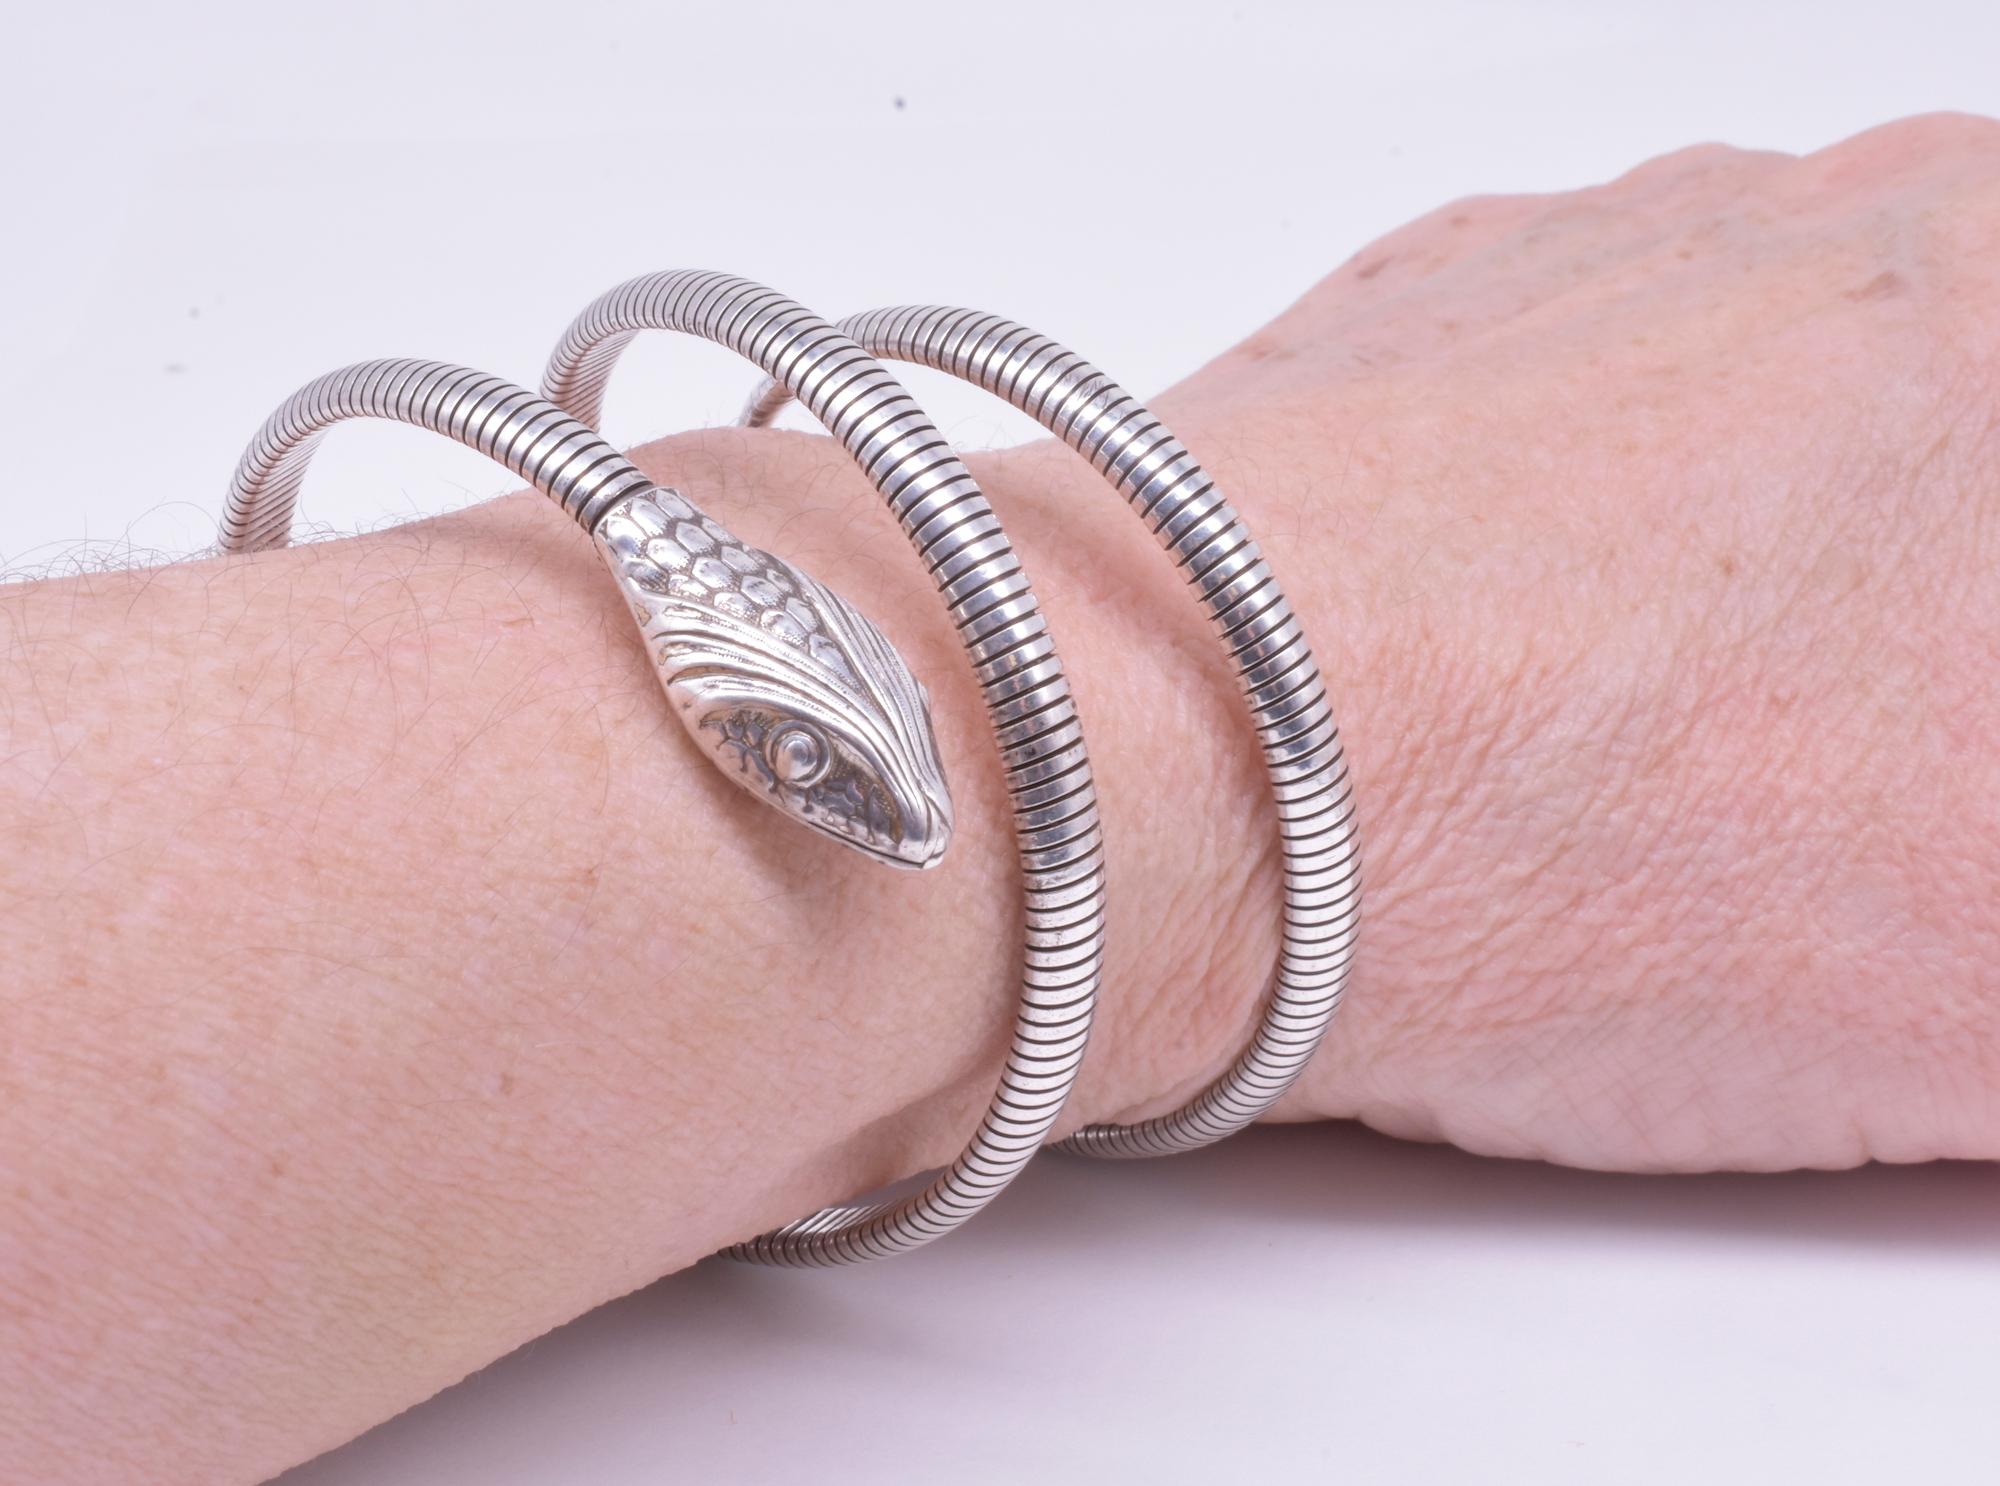 This Retro coiled flexible snake bracelet both fits and looks terrific on every size wrist.  Forstner was an American company based in Irvington NJ that started in 1920 and ceased operations in the 1980's. In their short existence they made